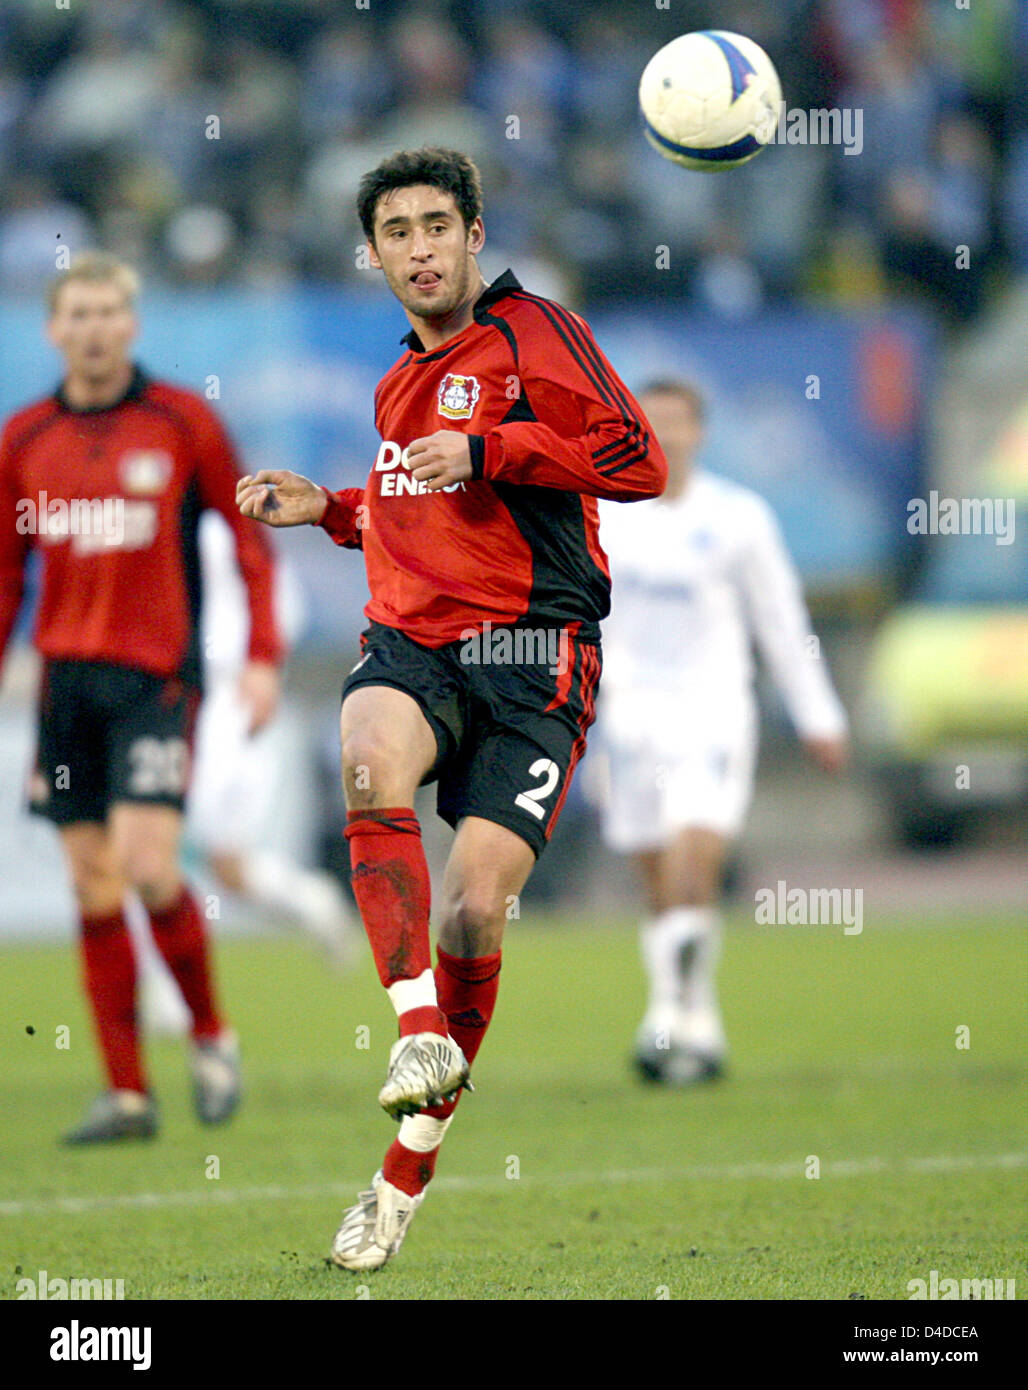 Leverkusen's Karim Haggui delivers the ball in the UEFA Cup quarter-finals' 2nd leg Zenit St. Petersburg v Bayer 04 Leverkusen at Petrovsky stadium of St. Petersburg, Russia, 10 April 2008. Leverkusen won the leg 1-0, but Zenit moves up to semi-finals with a 4-2 win on aggregate. Photo: Rolf Vennebernd Stock Photo